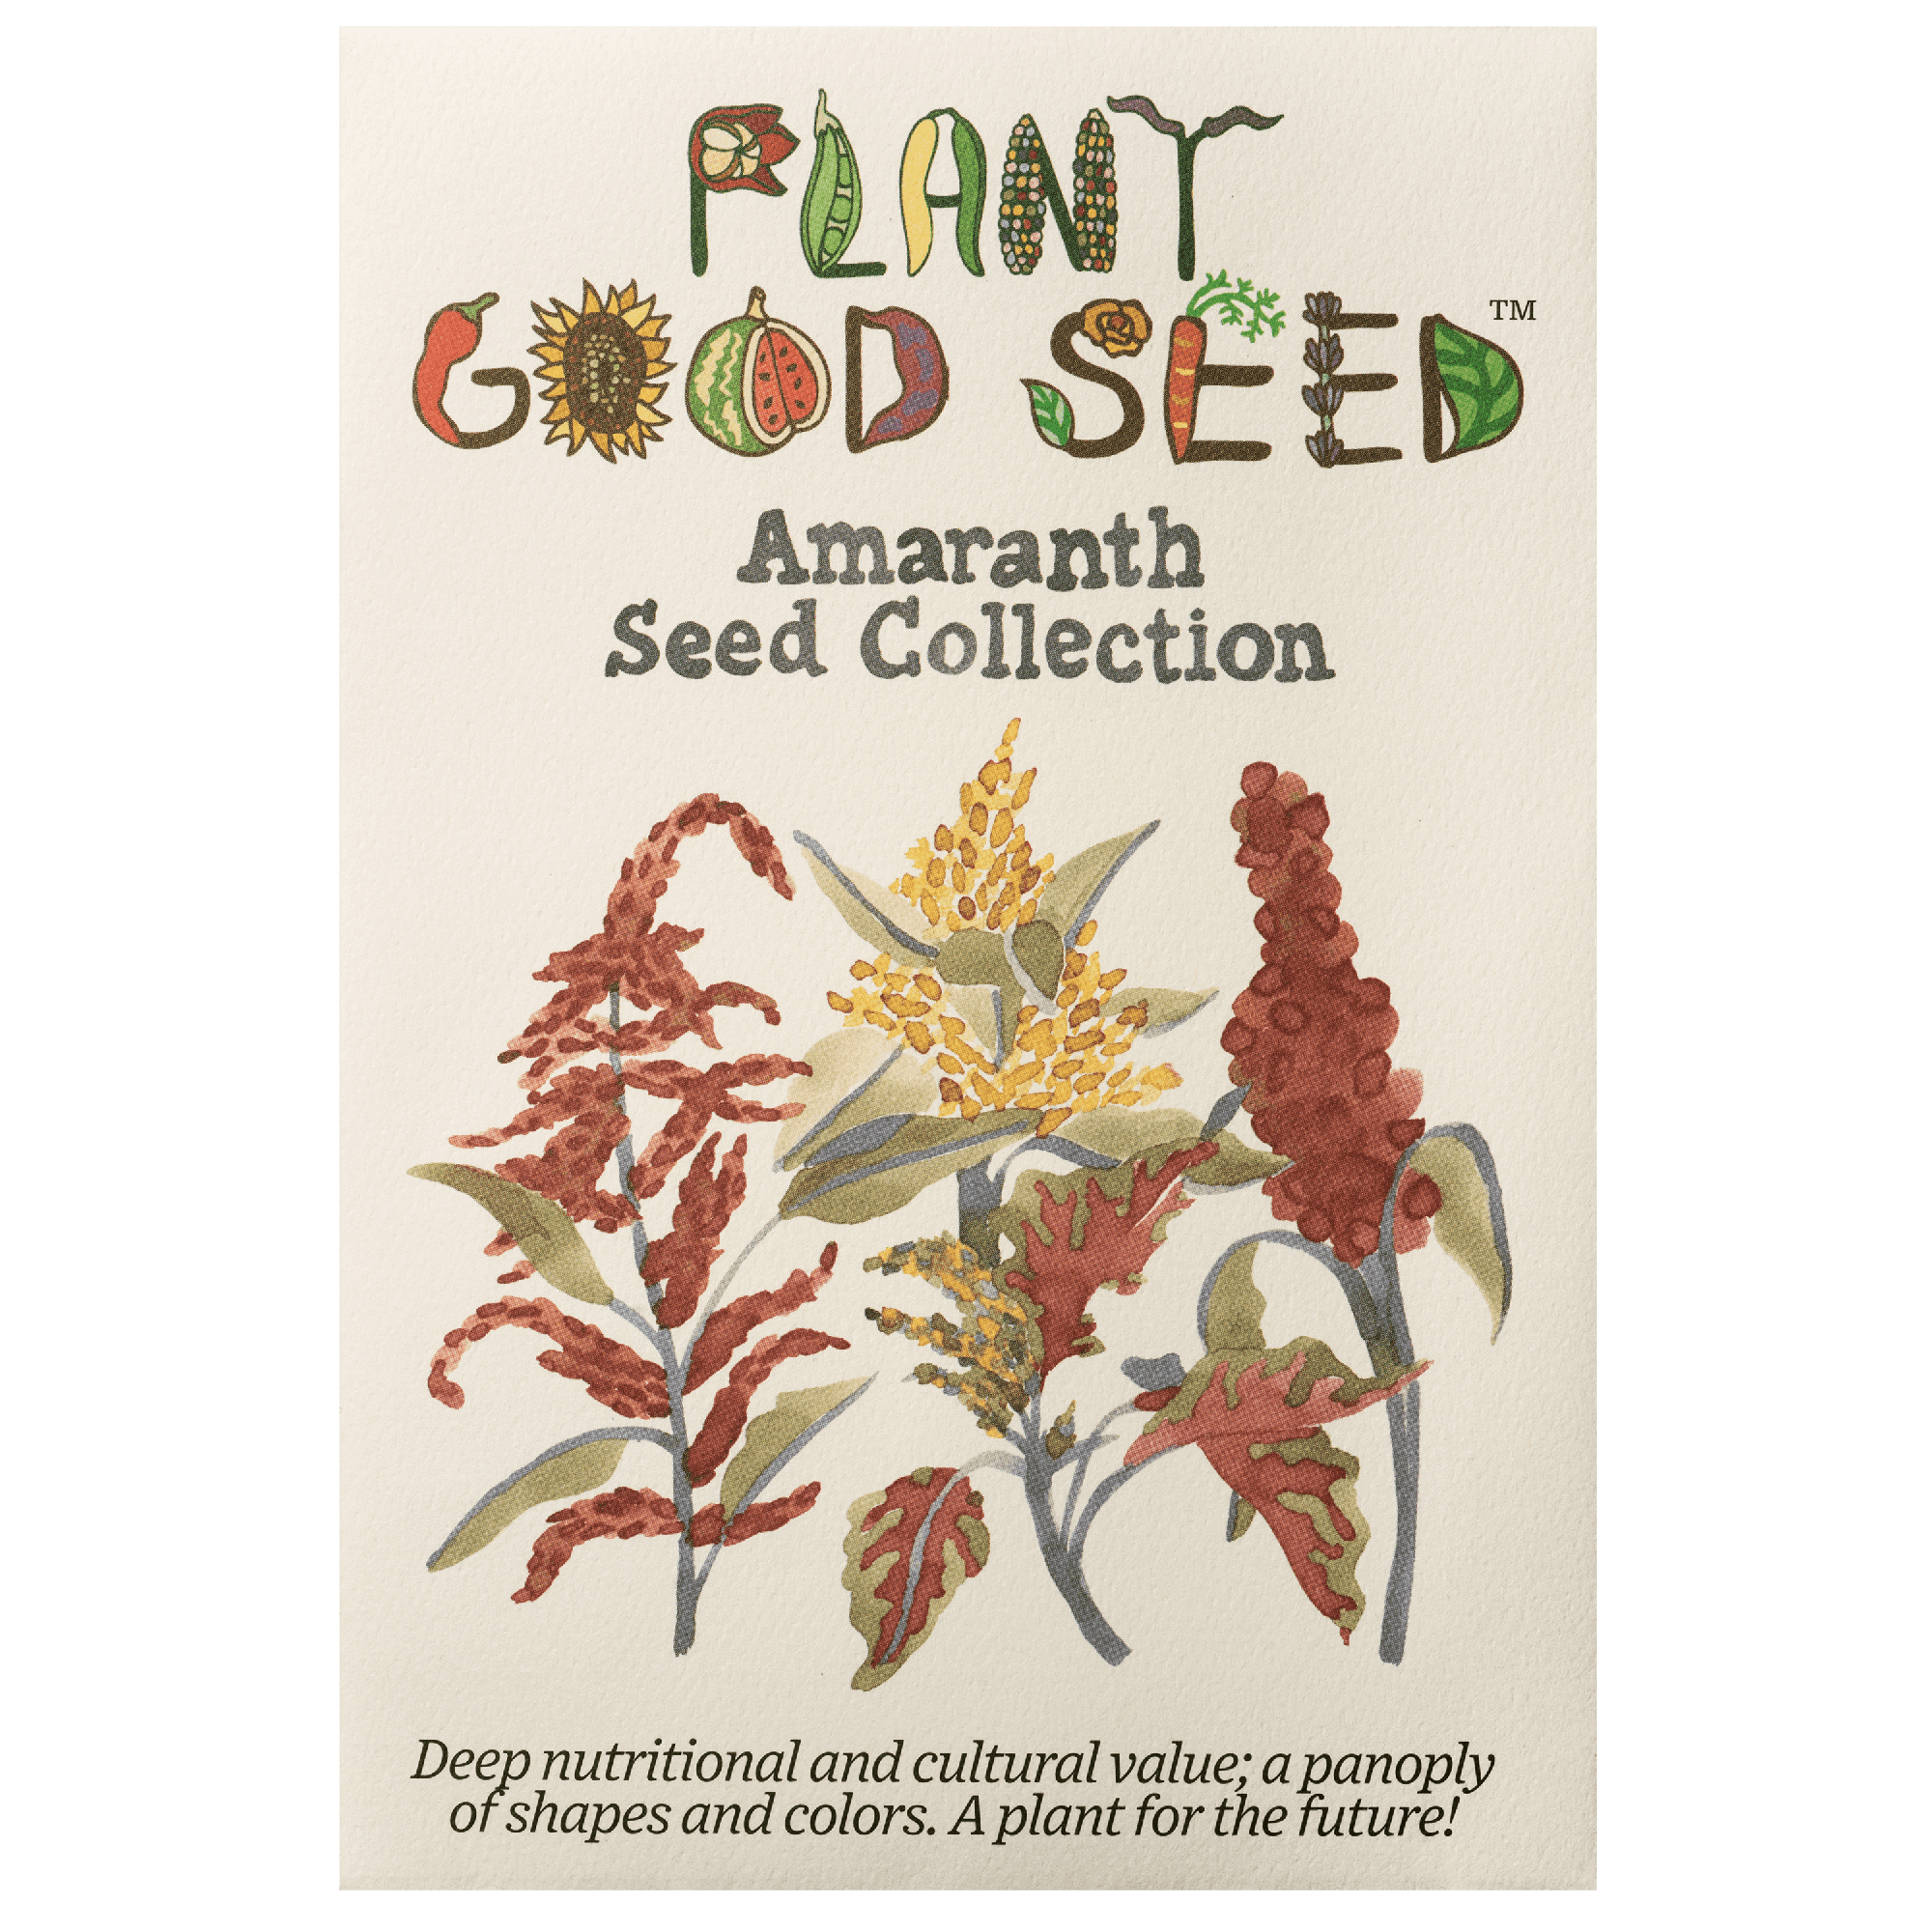 Amaranth Seed Collection